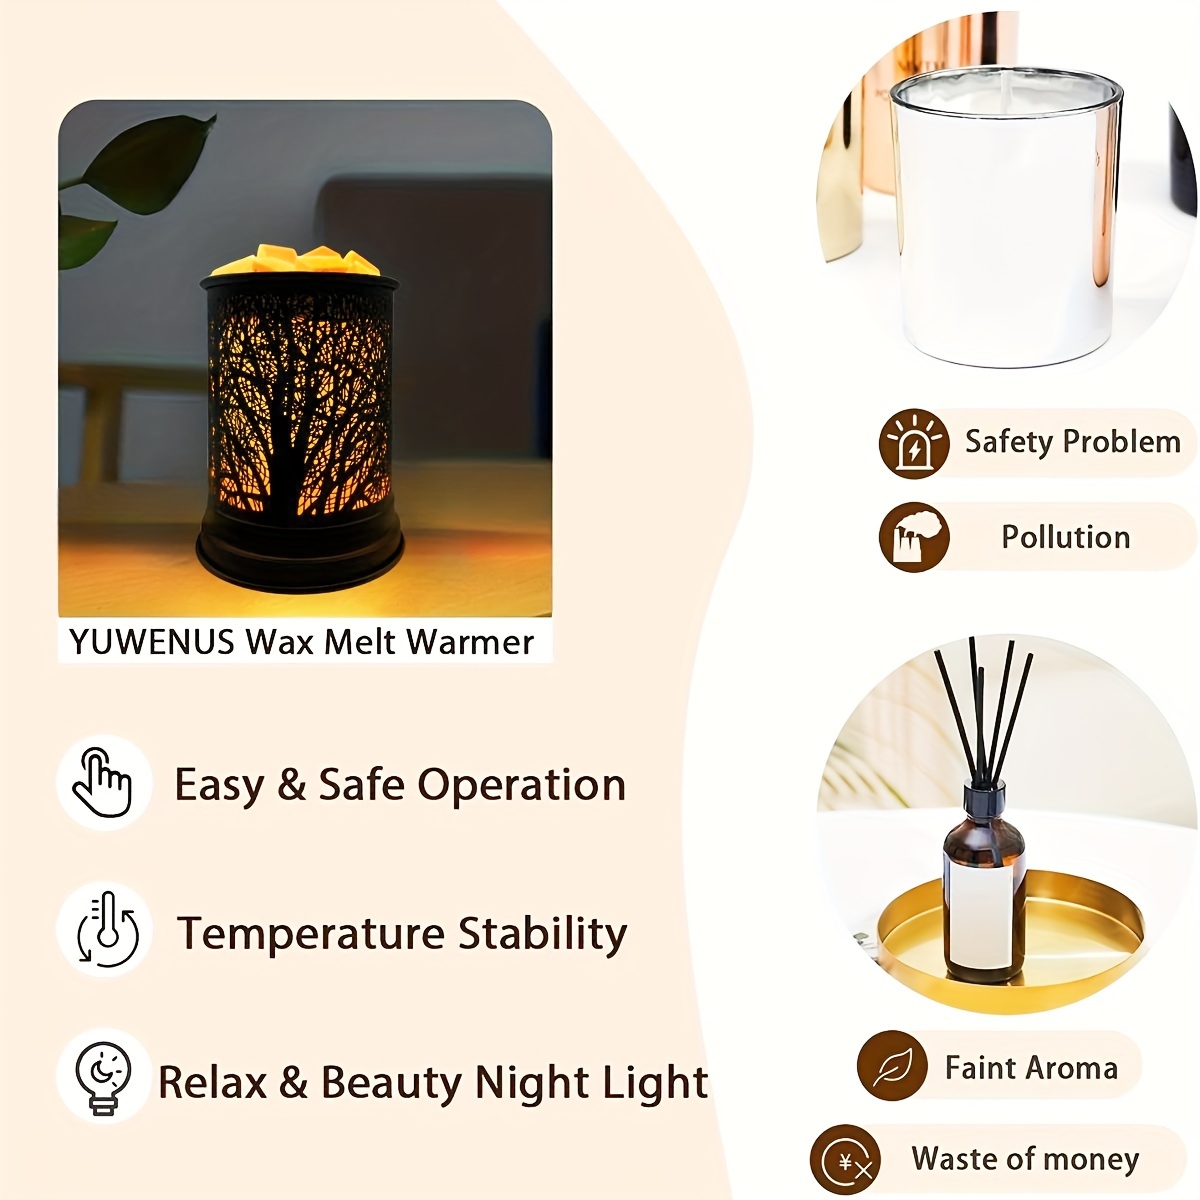 1pc, Crystal Wax Melt Warmer Candle Wax Warmer, Desktop Wax Warmer With  Light For Scented Wax Burner Electric Wax Melter For Home, Mother's Day  Gifts